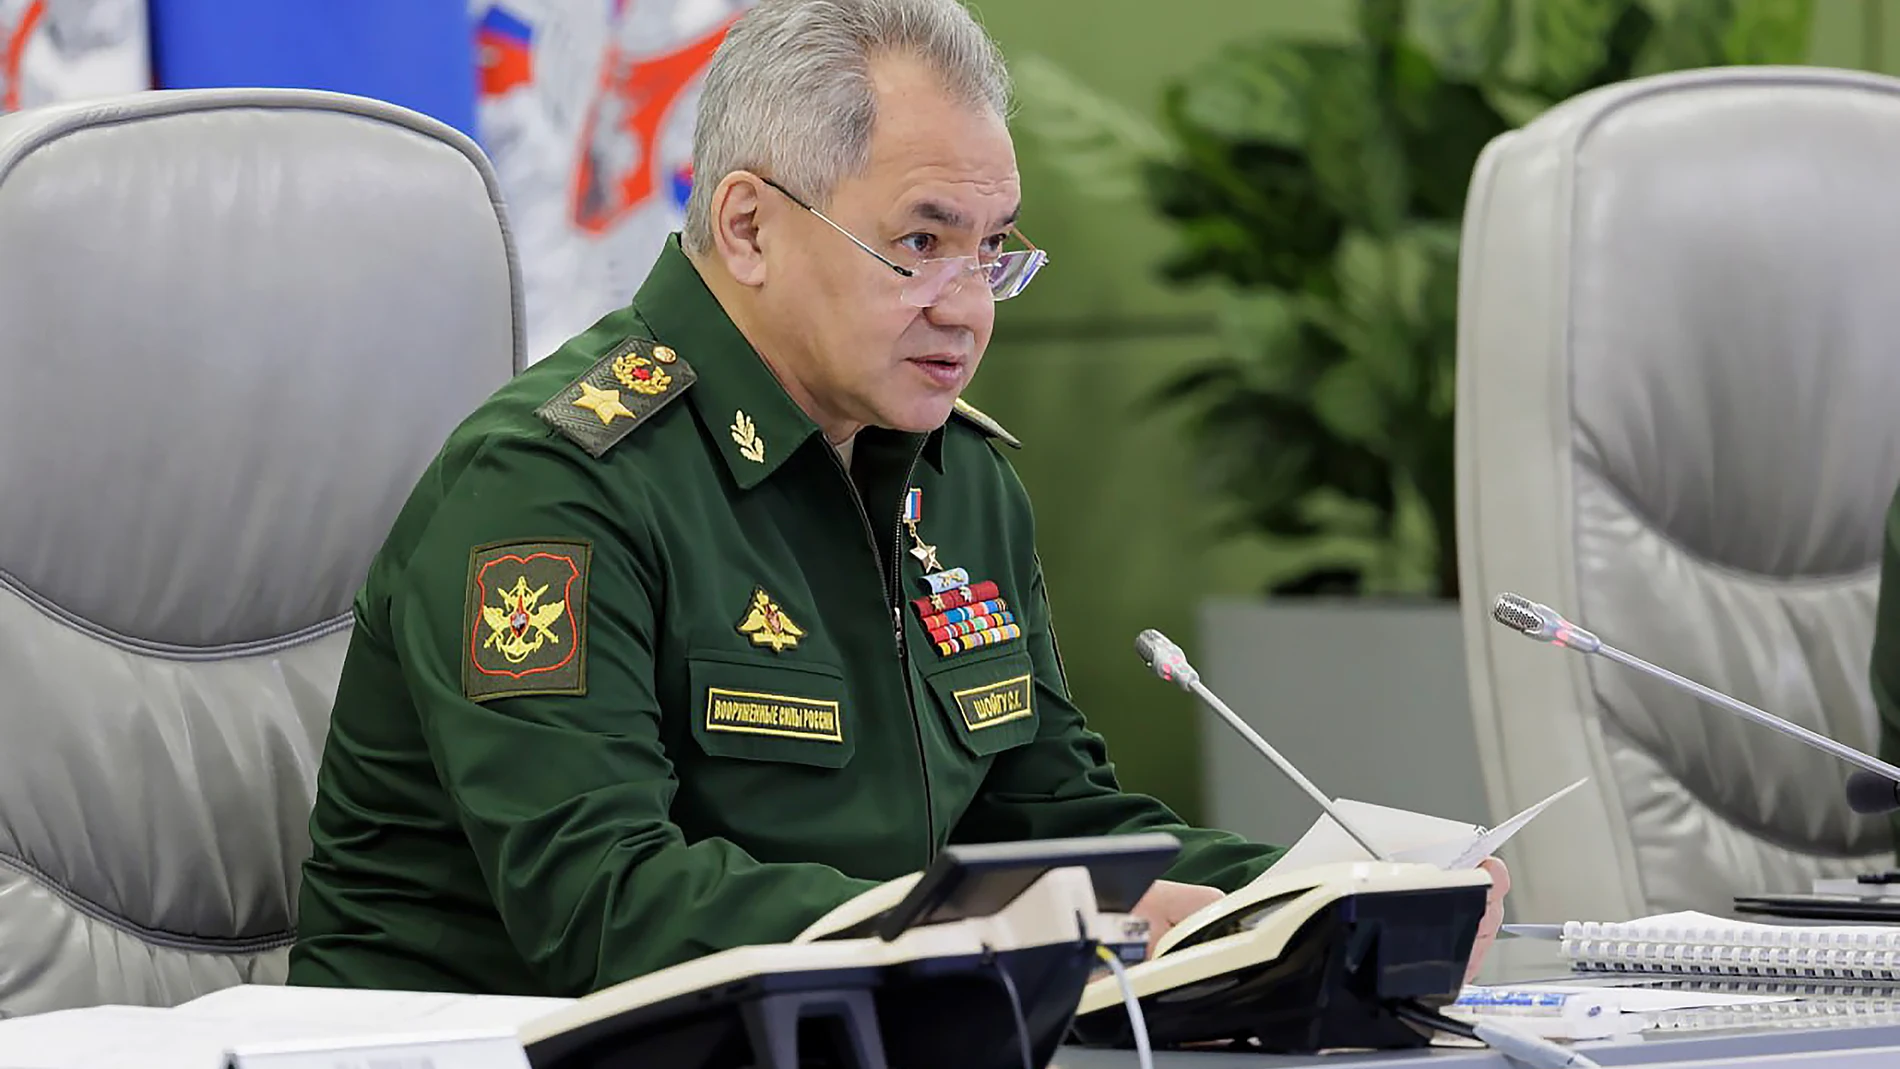 Moscow (Russian Federation), 07/02/2023.- A still image taken from a handout video made available by the Russian Defence Ministry Press-Service shows Russian Defense Minister General of the Army Sergei Shoigu addressing a meeting in the National Defense Control Center of the Russian Federation in Moscow, Russia, 07 February 2023. The Russian Defense Minister accused the US and its allies of prolonging the conflict in Ukraine. Arms support for Ukraine is effectively dragging NATO into the conf...